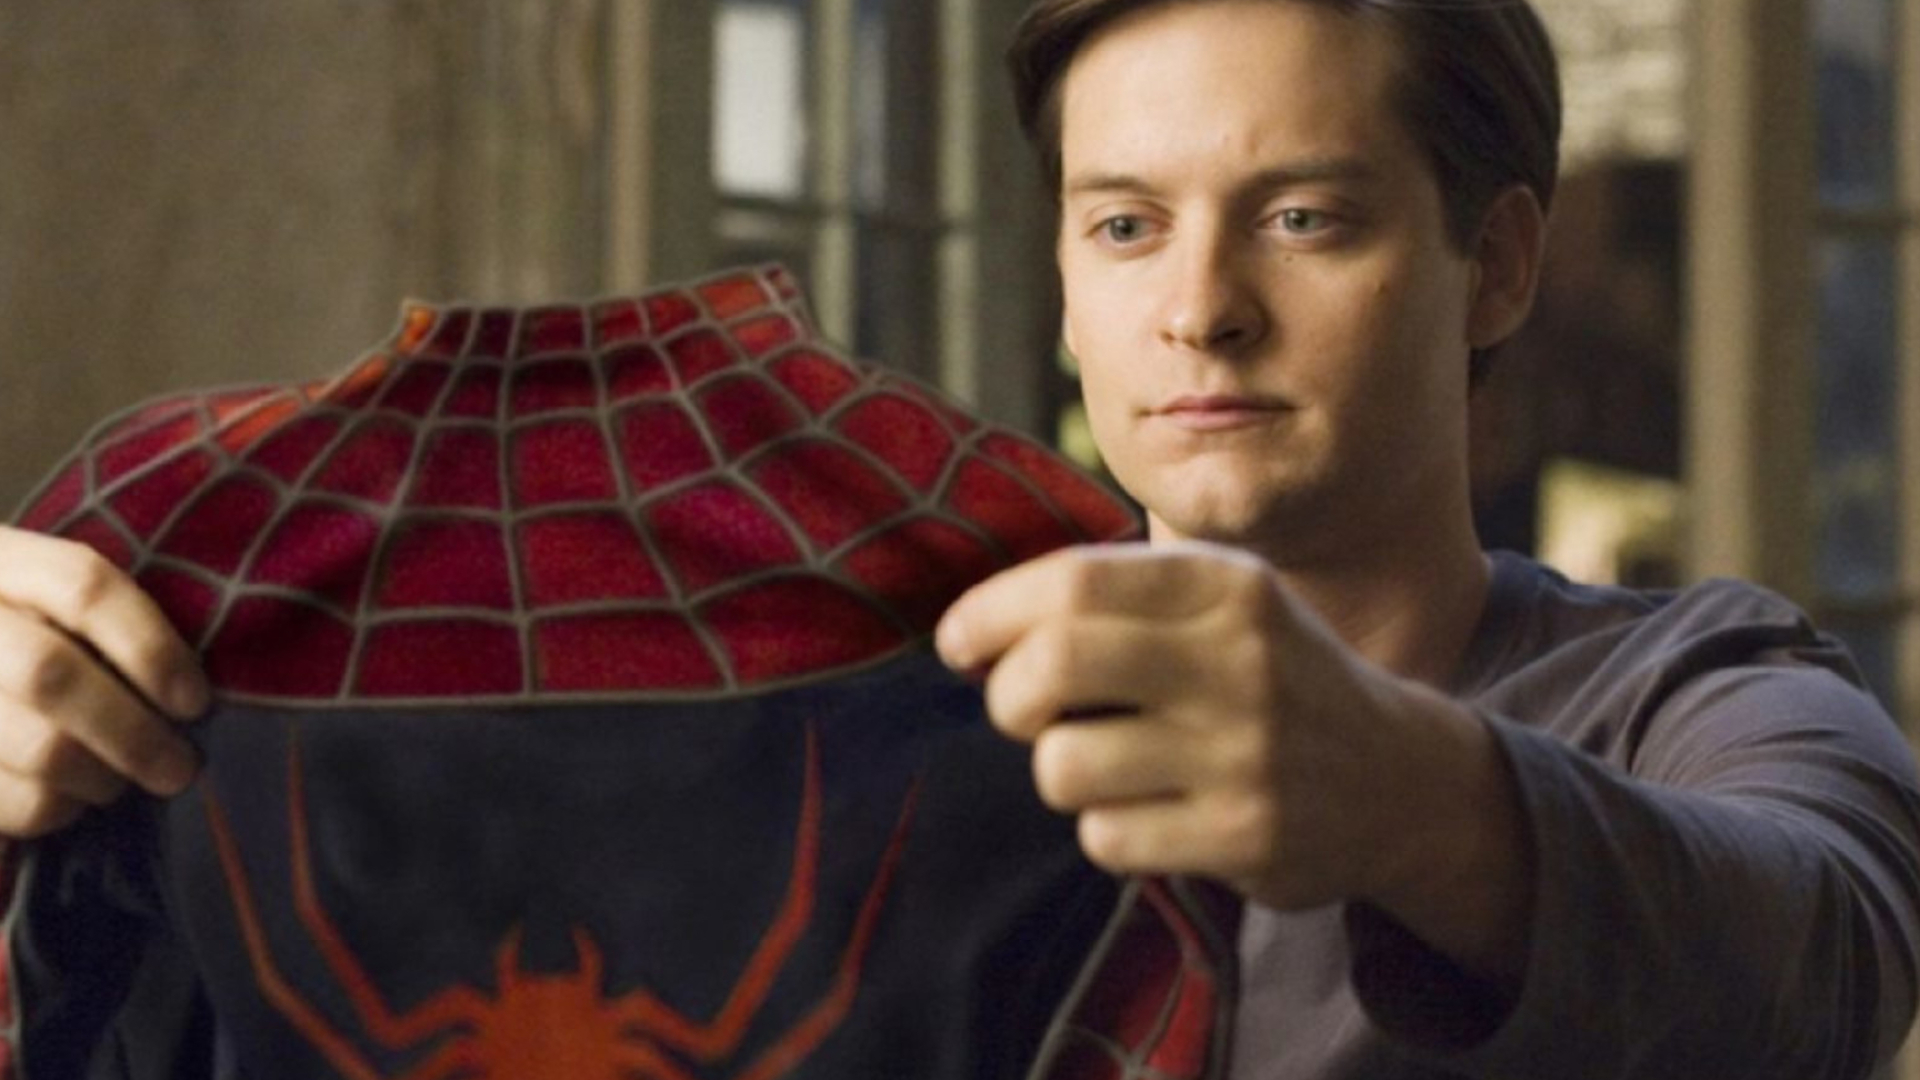 Fans campaign, Tobey Maguire, Fourth movie, The Digital Fix, 1920x1080 Full HD Desktop